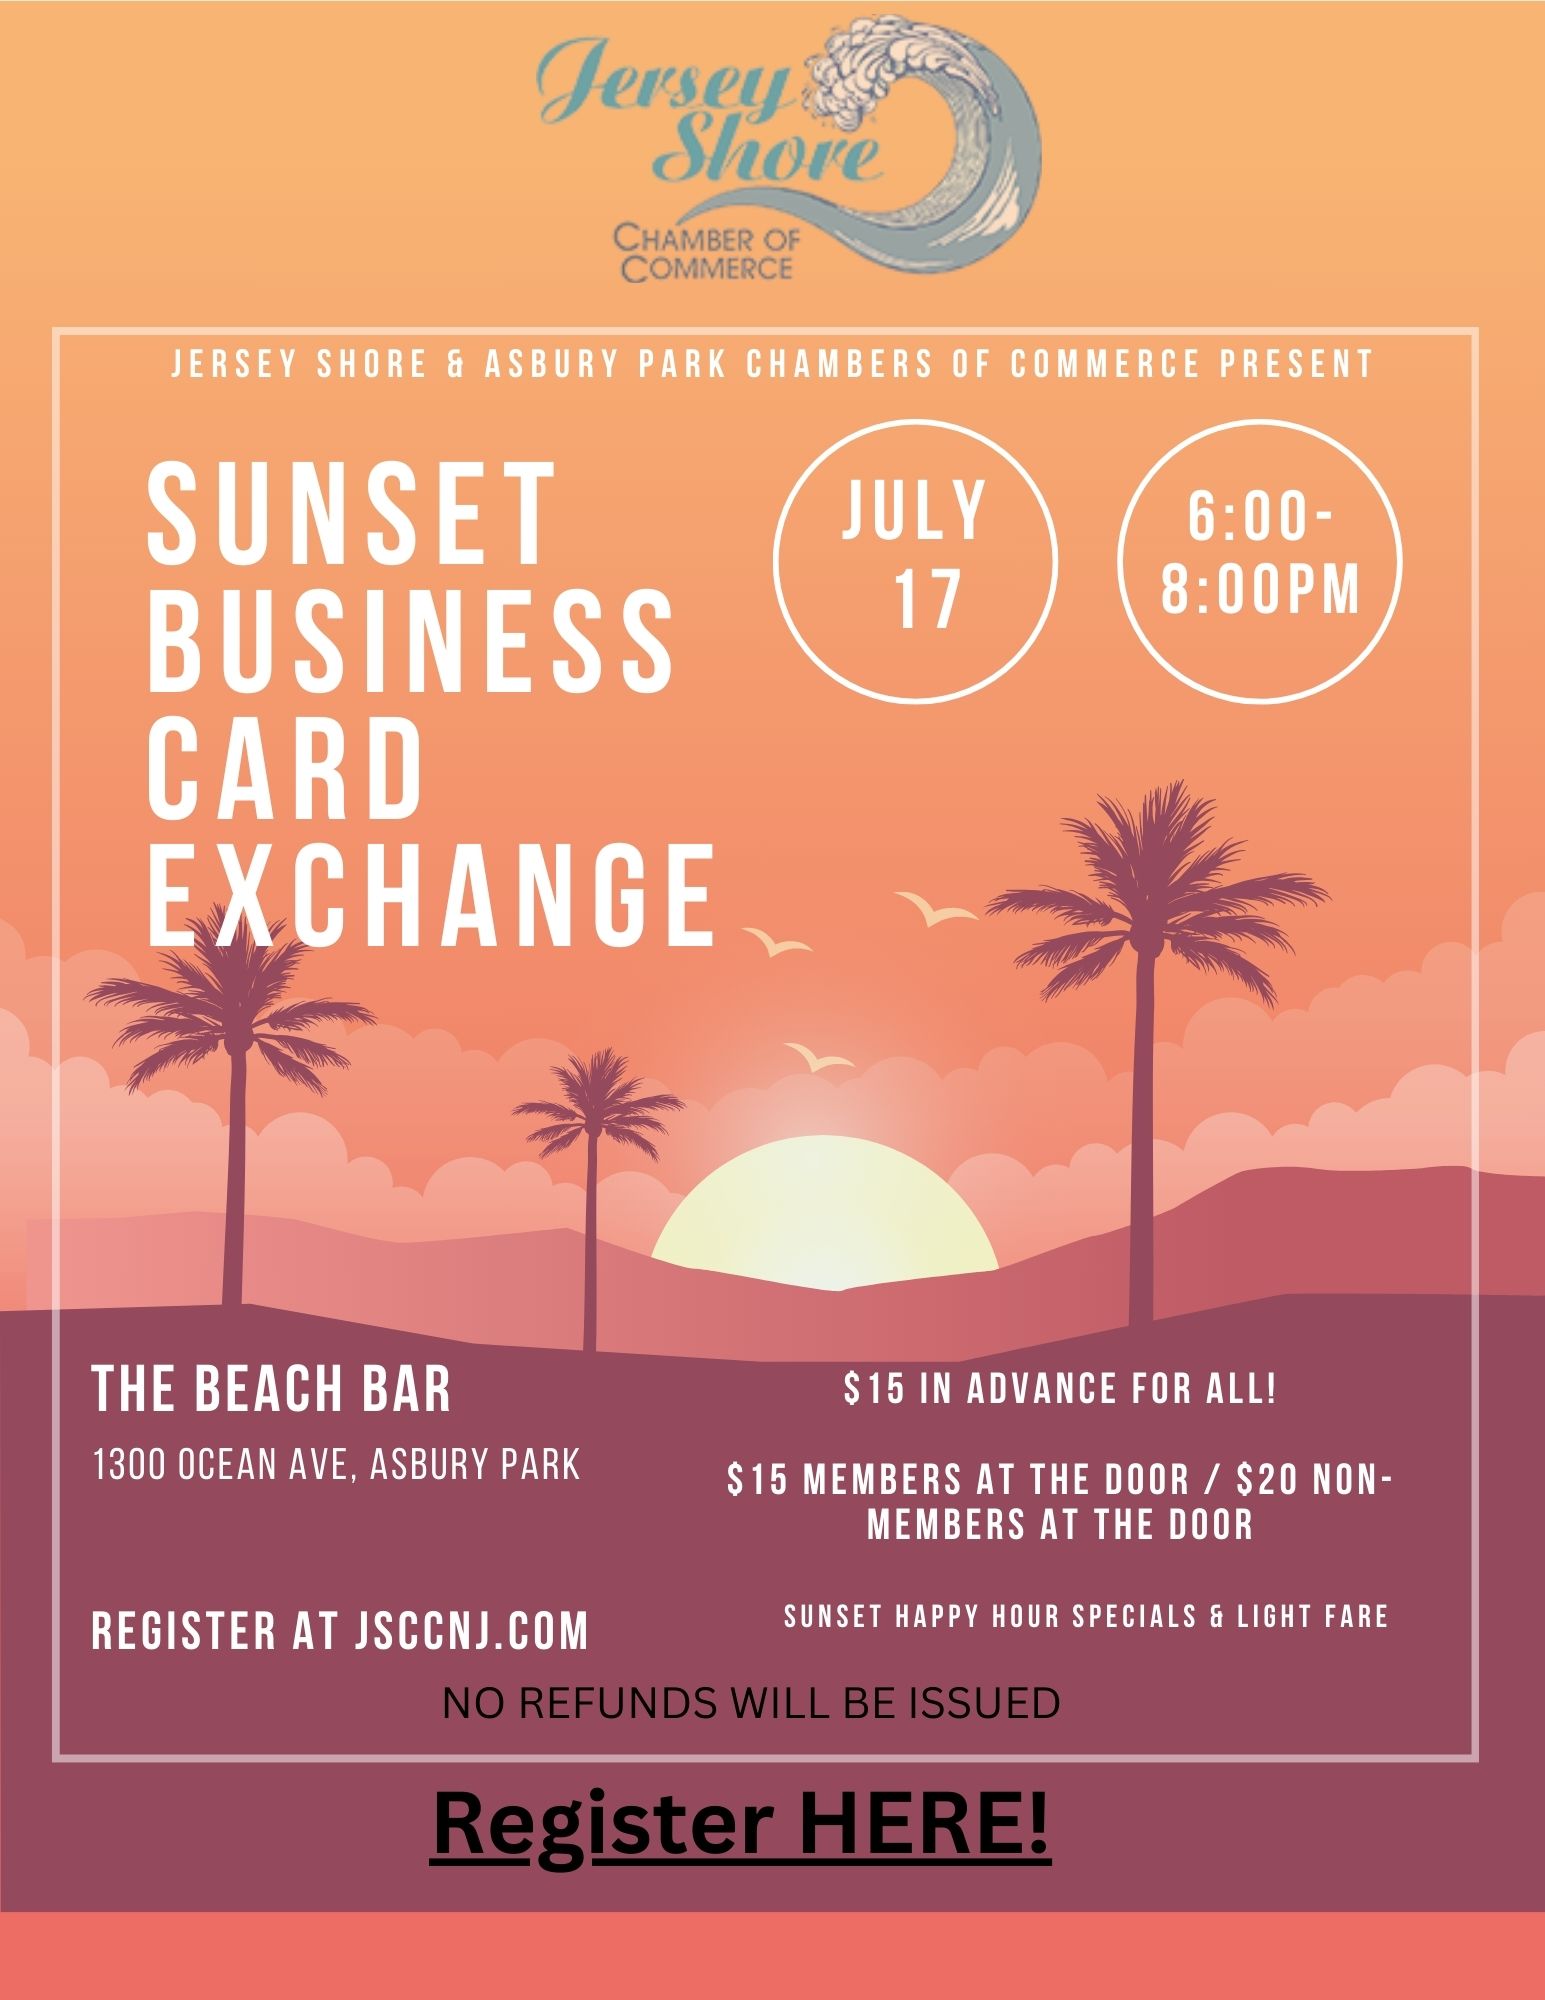 Jersey Shore Chamber of Commerce – Joint Networking with Asbury Park Chamber of Commerce